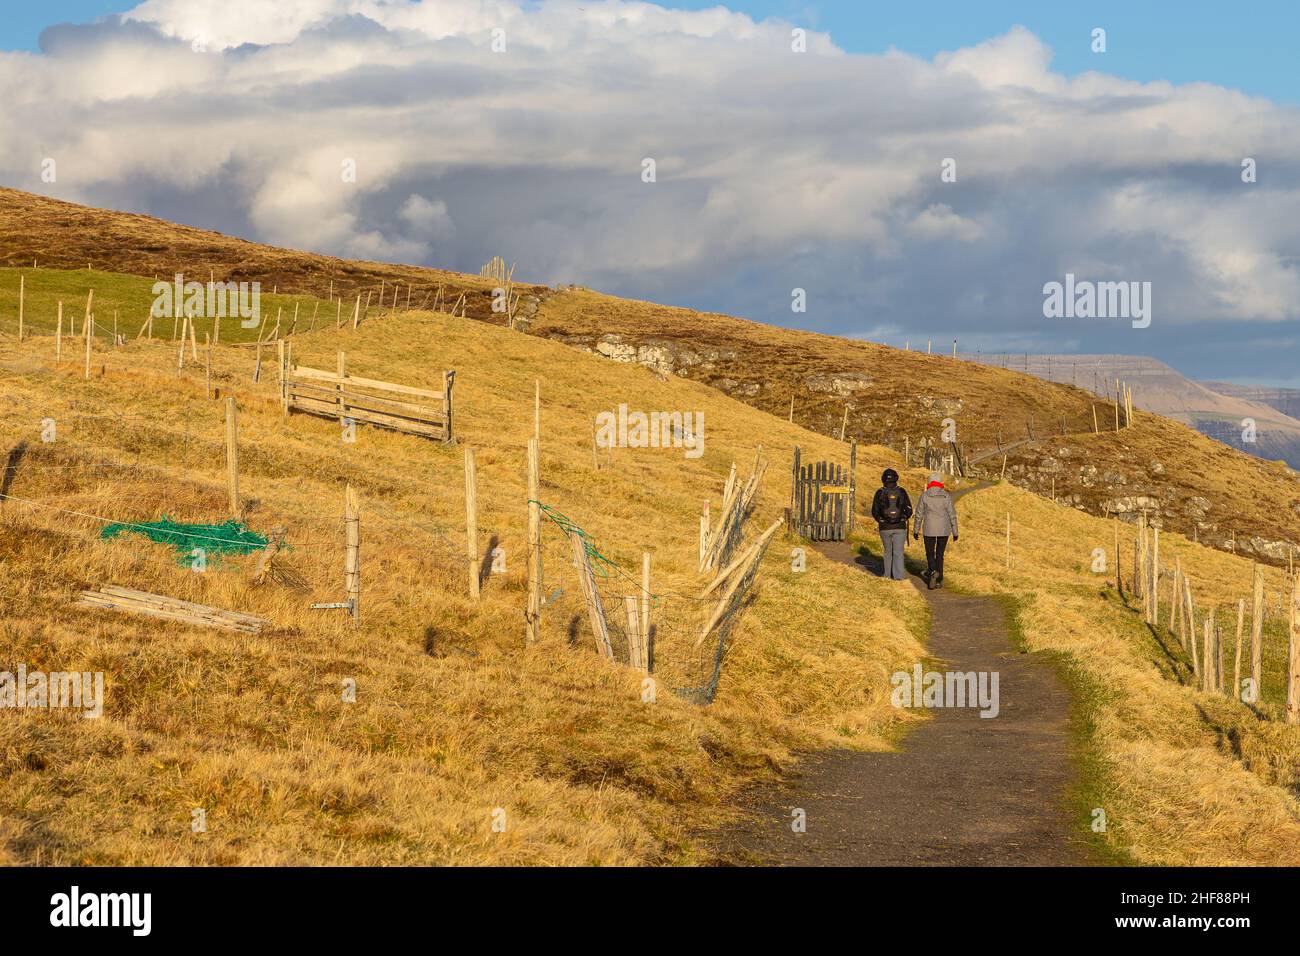 Sandavagur, Faroe Islands - 28 April 2018: Tourists on the path of a Witch Finger. Hills around. Sunny spring evening. Stock Photo